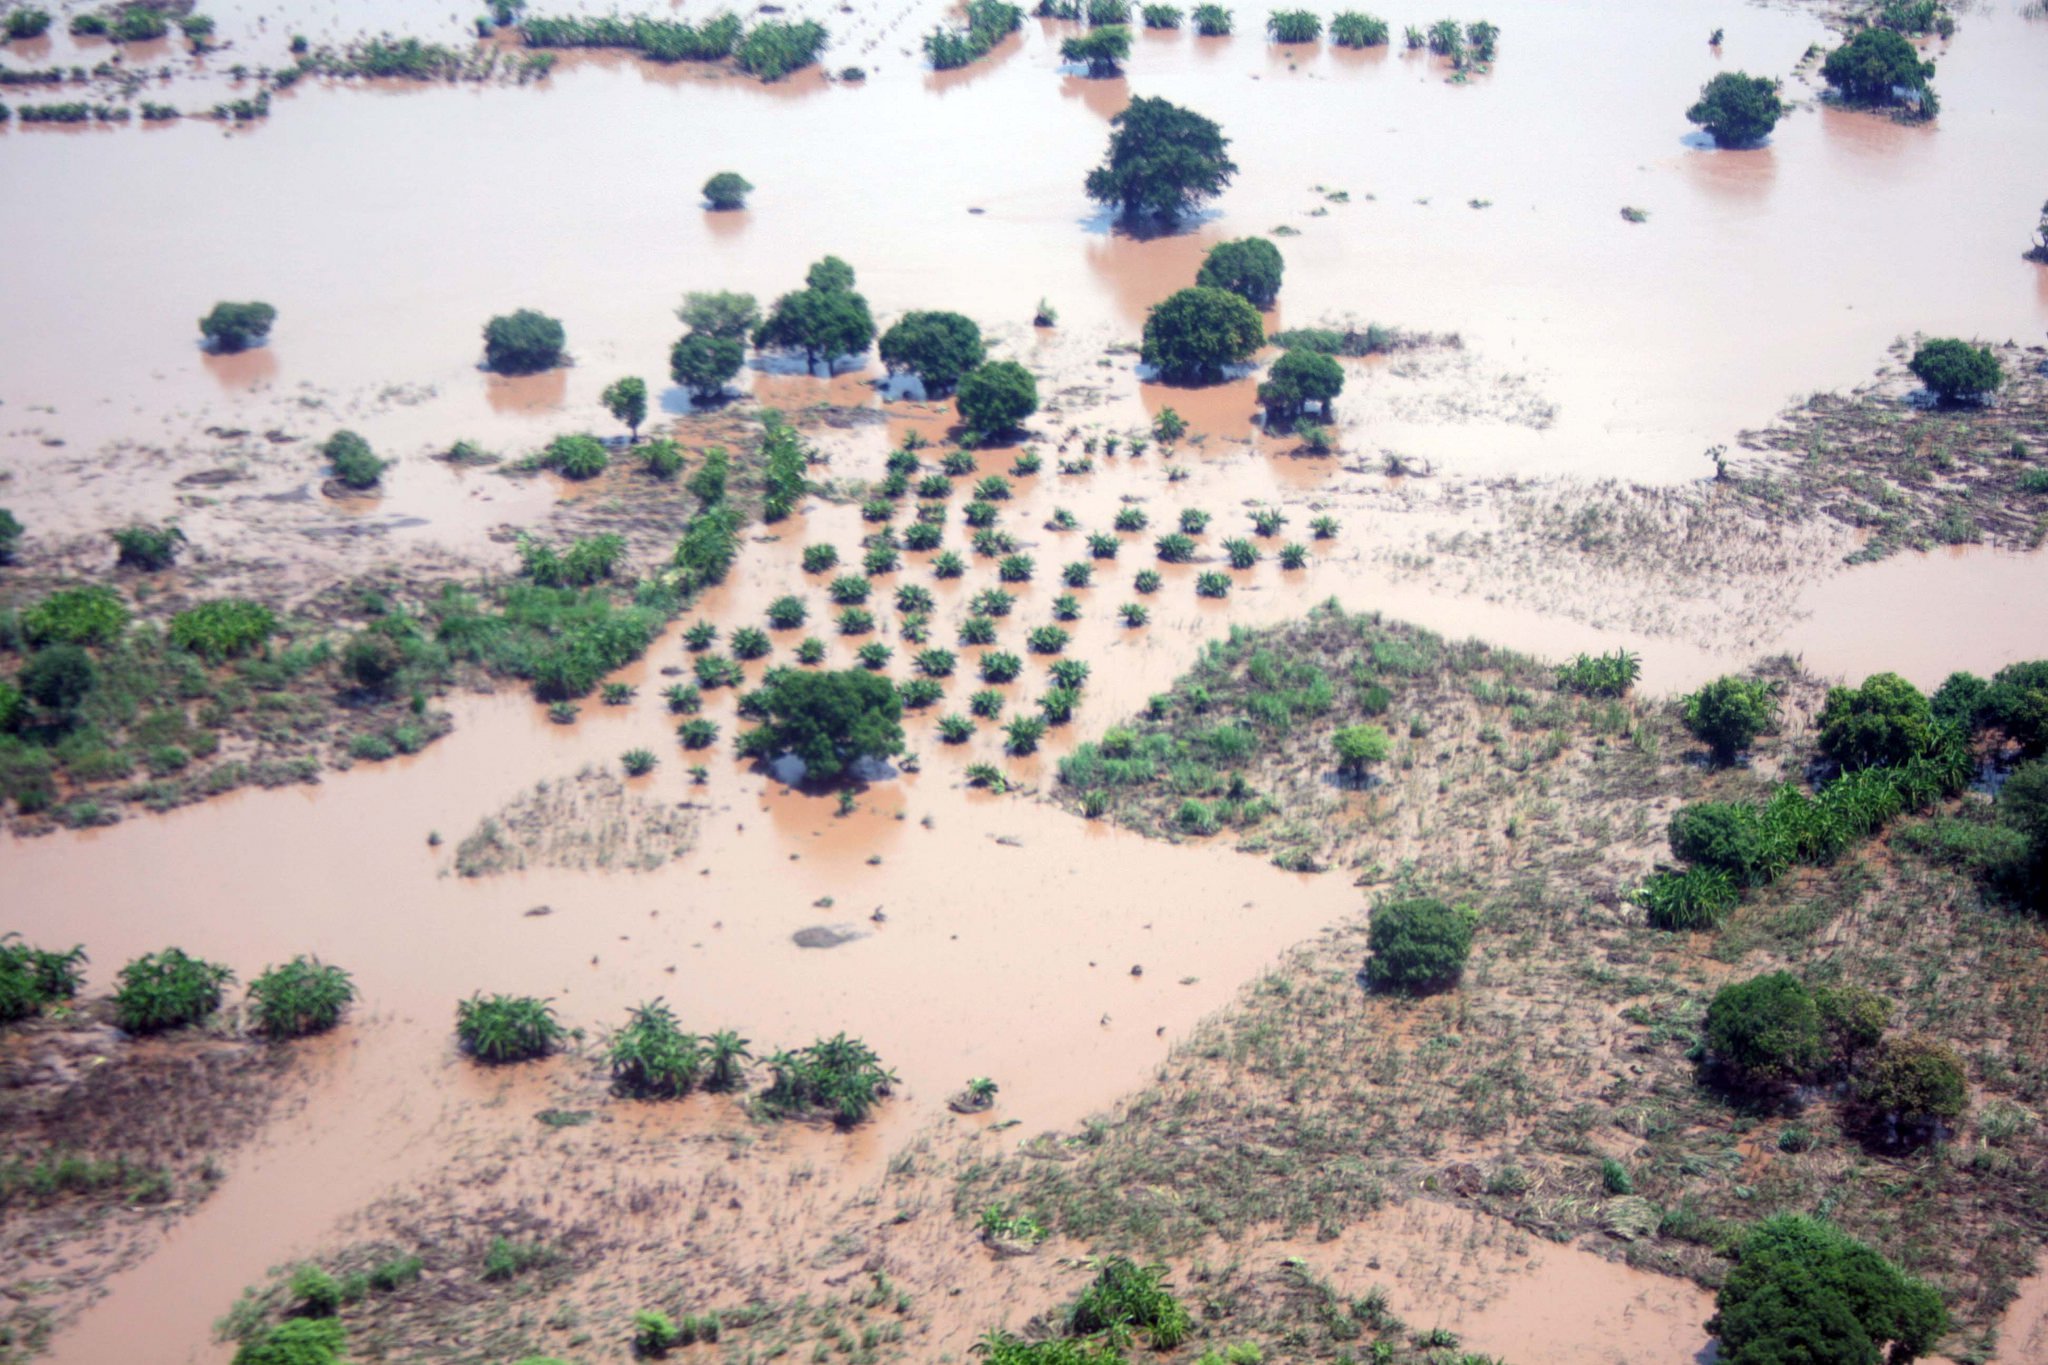 Submerged crops in Flood Waters of the Lower Shire River, taken January 16, 2015.